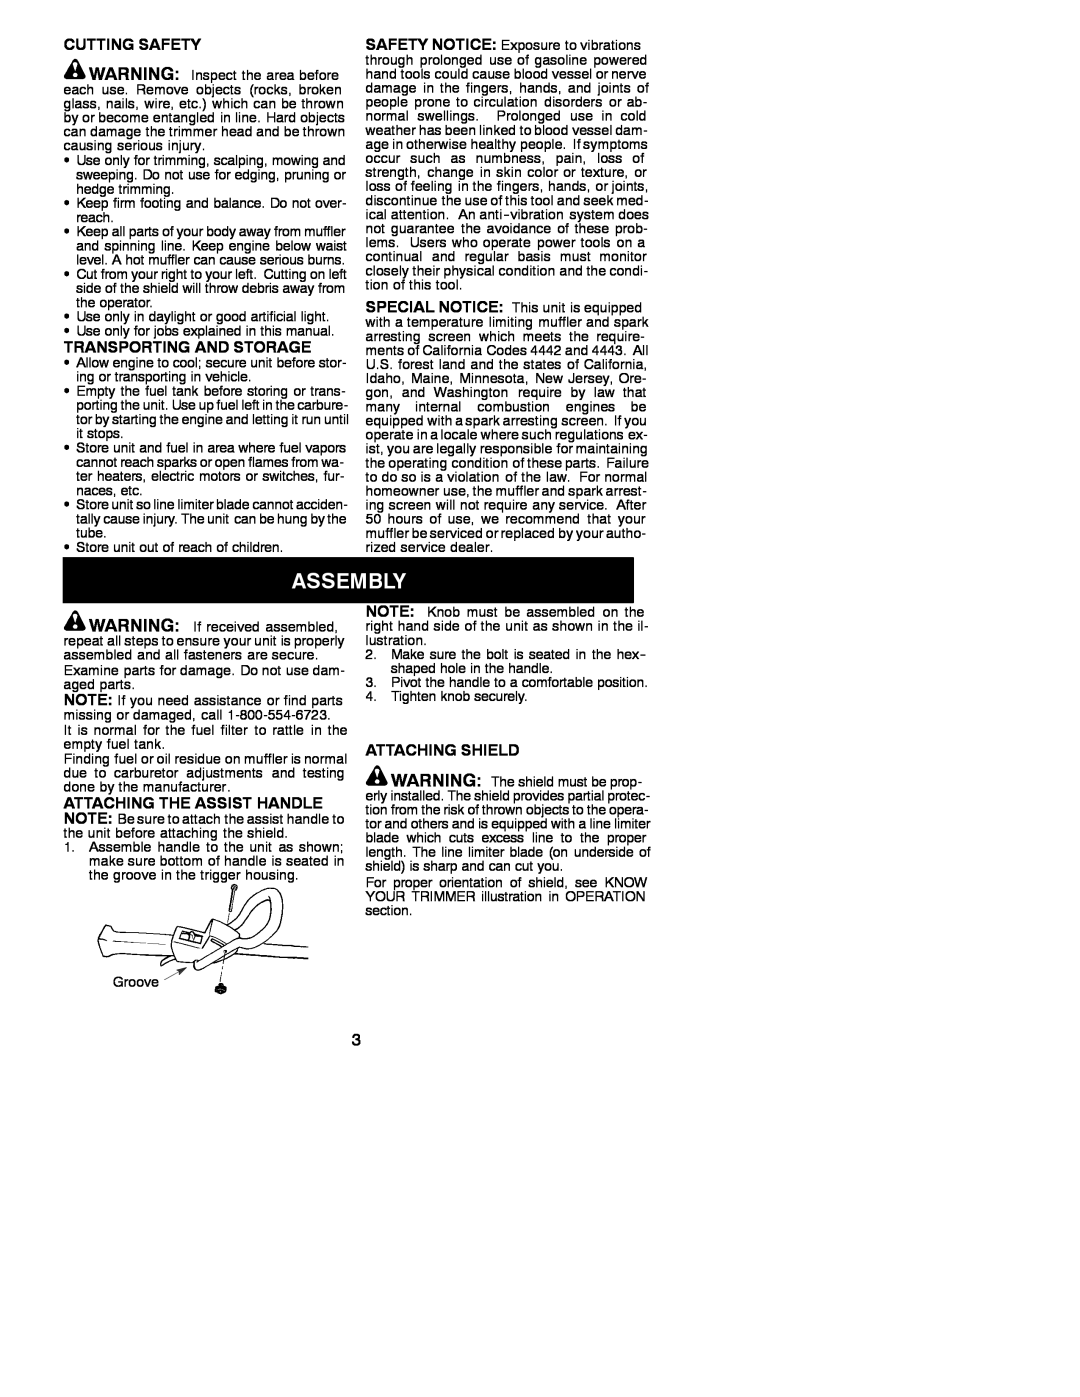 Weed Eater 530086927 instruction manual Cutting Safety, Transporting And Storage, Attaching Shield 